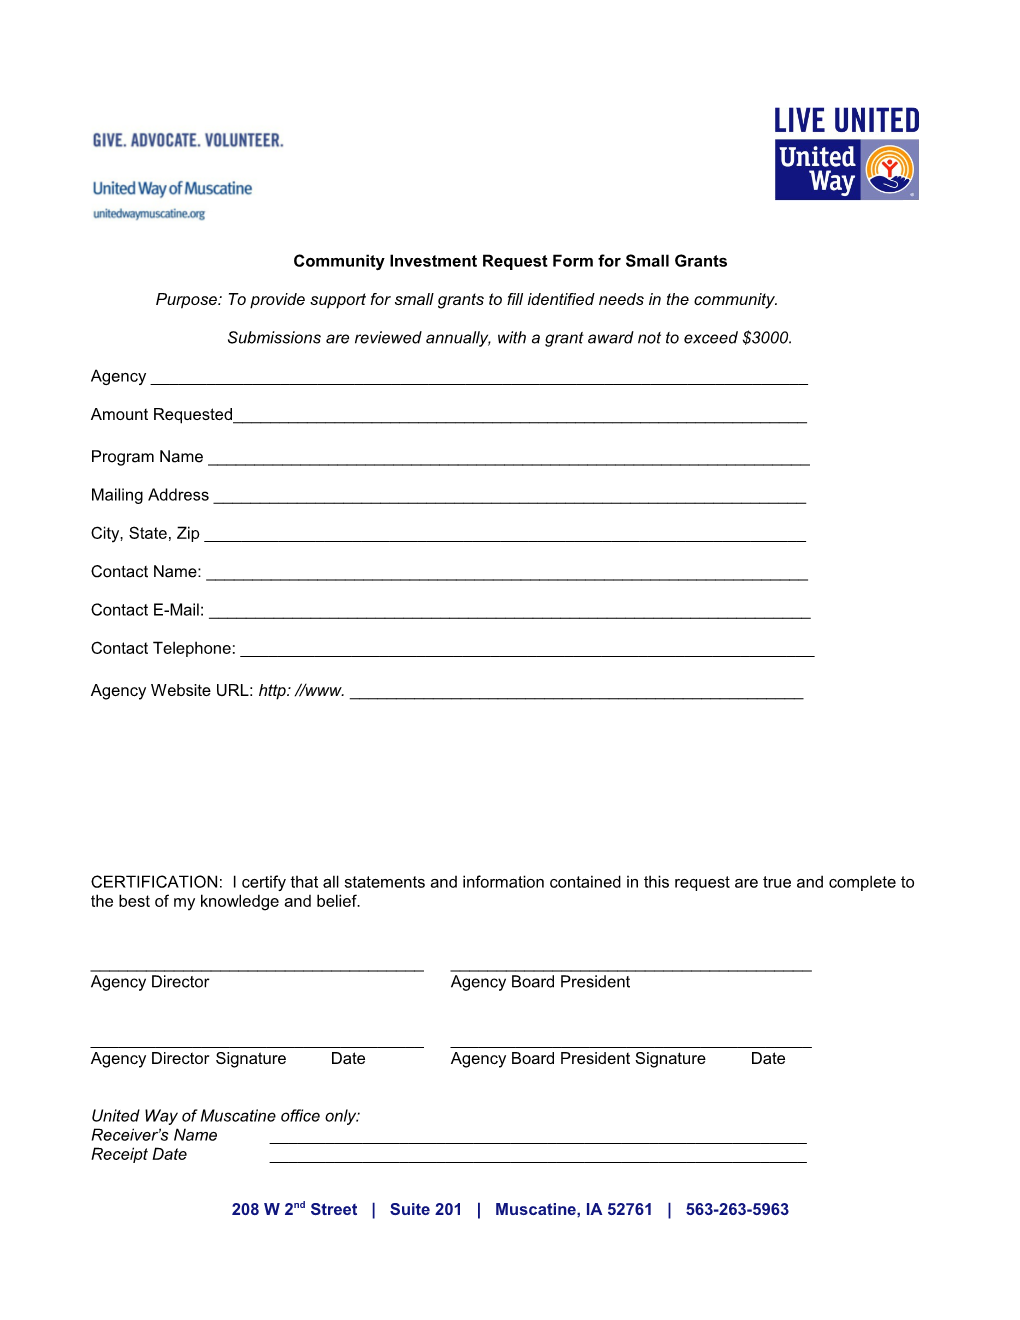 Community Investment Request Form for Small Grants